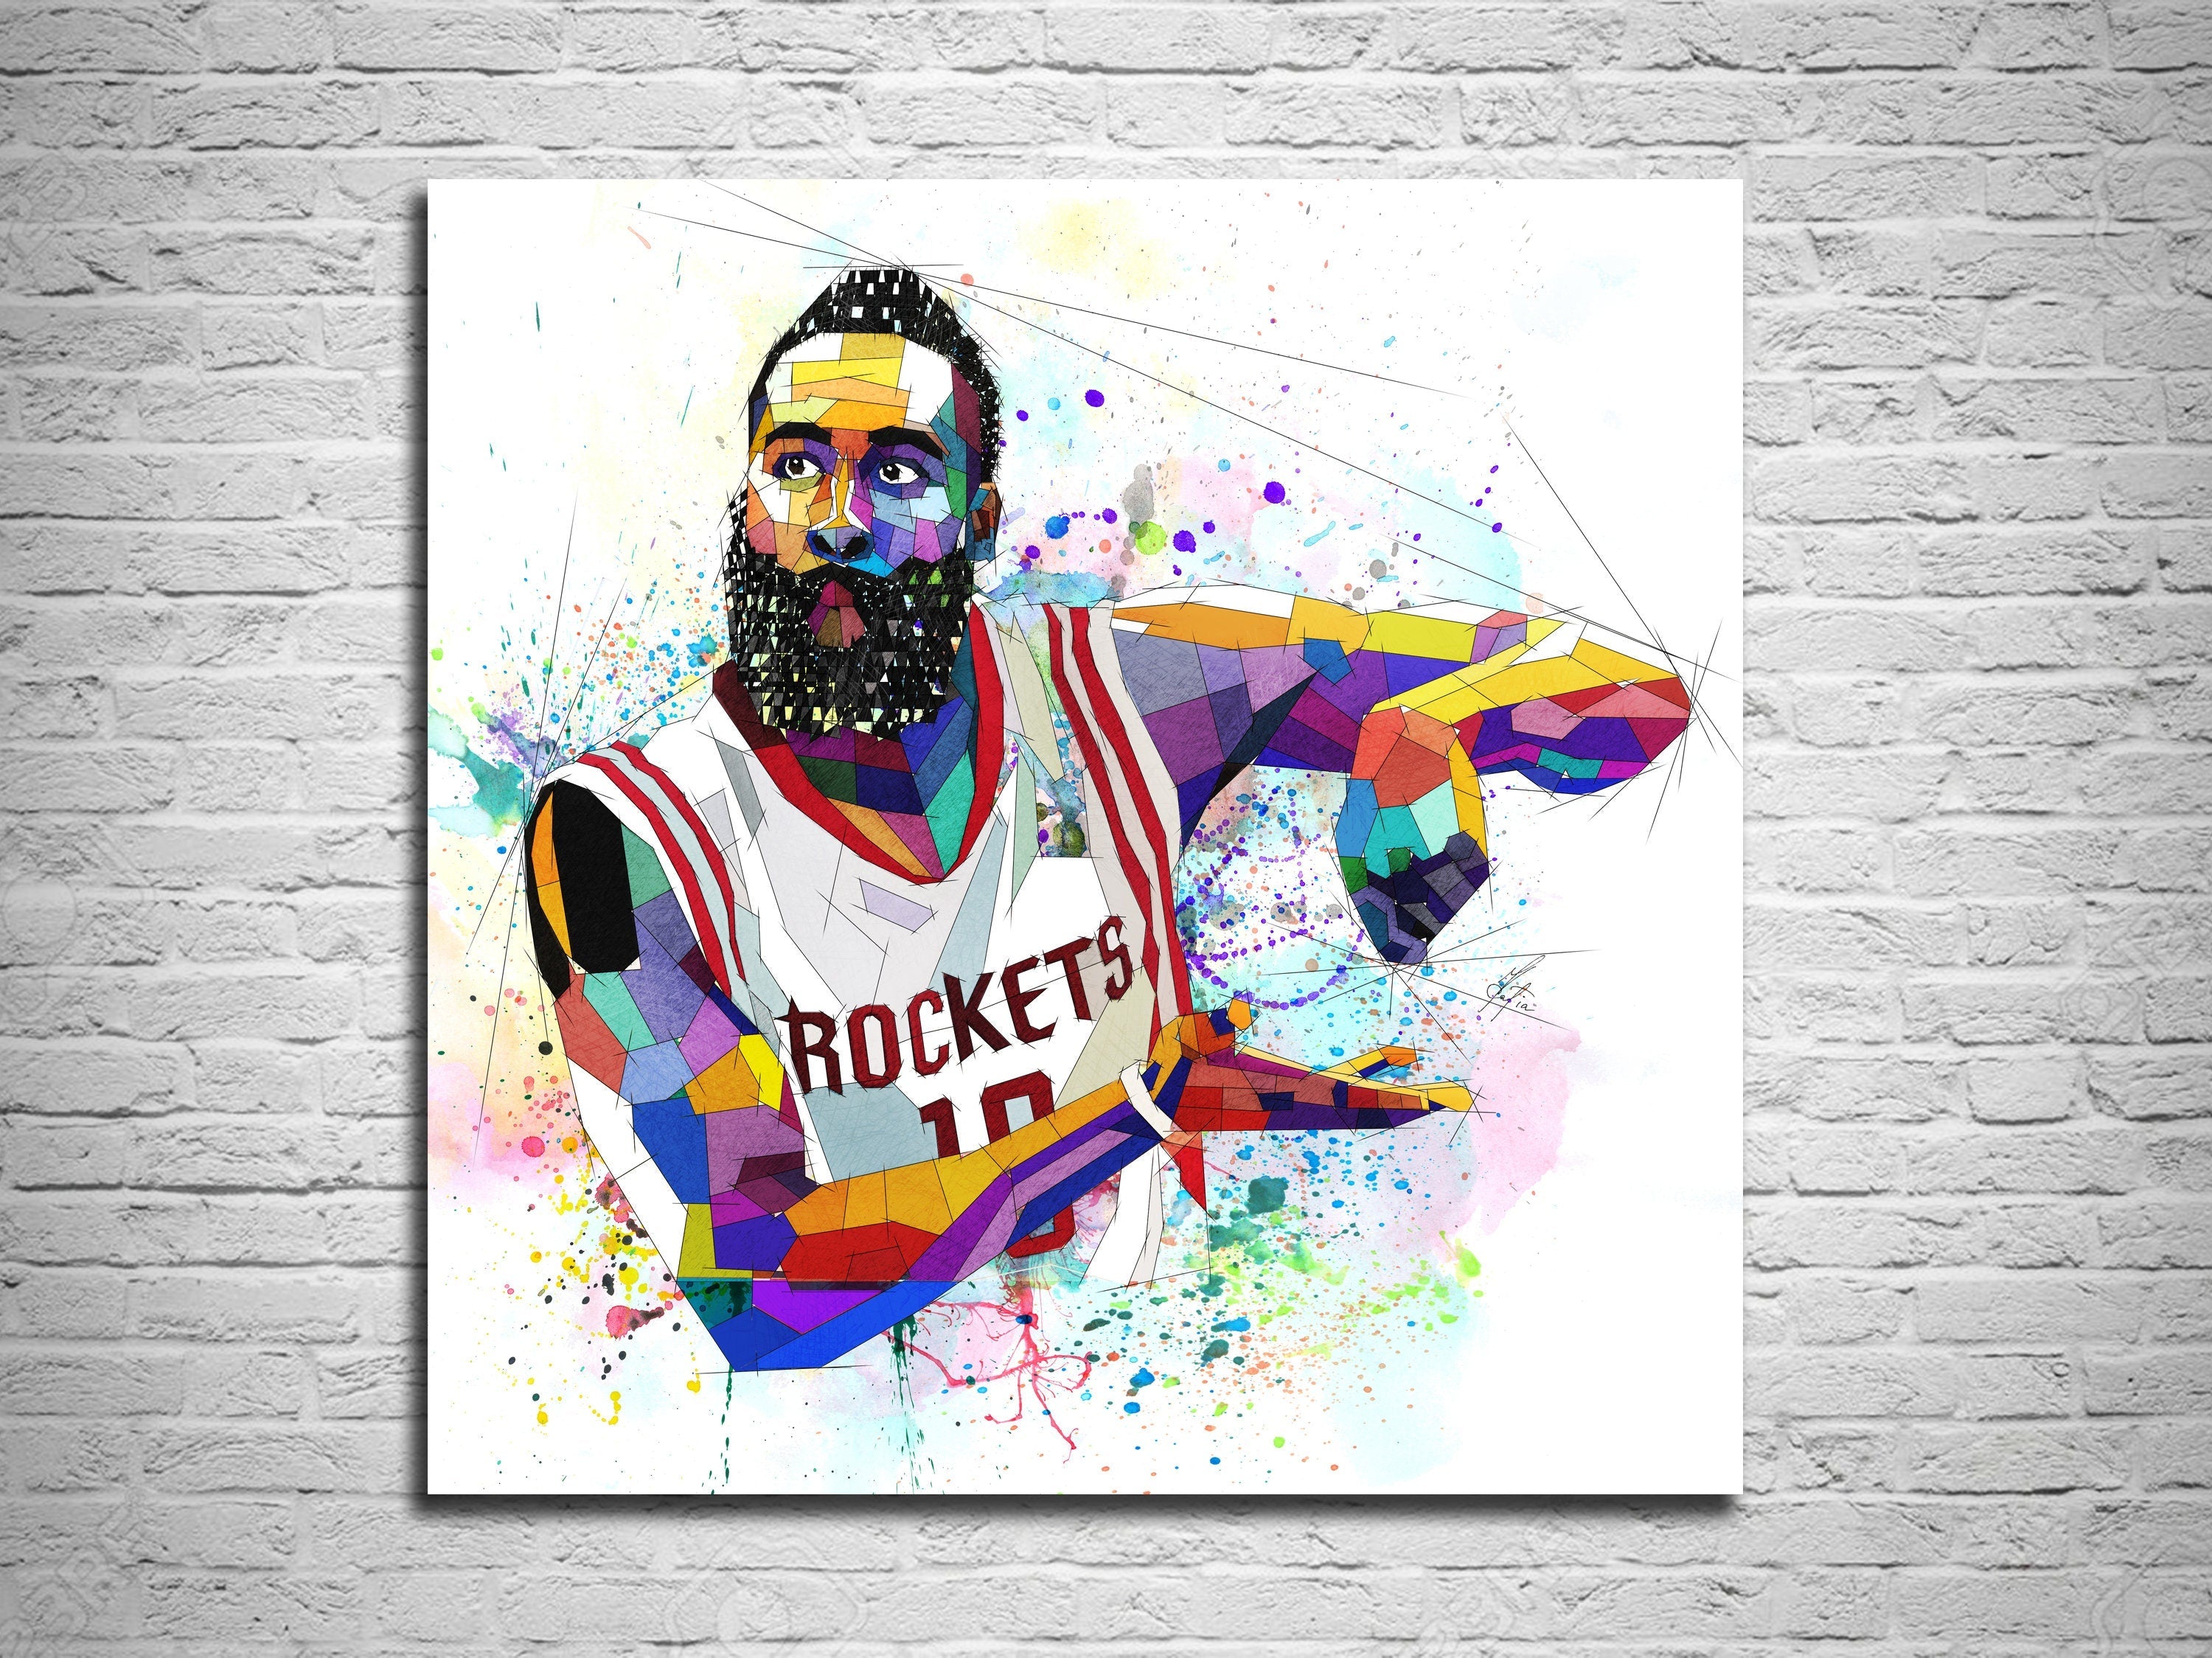 James Harden Basketball Player Poster (32) Art Poster Canvas Painting Decor  Wall Print Photo Gifts Home Modern Decorative Posters Framed/Unframed